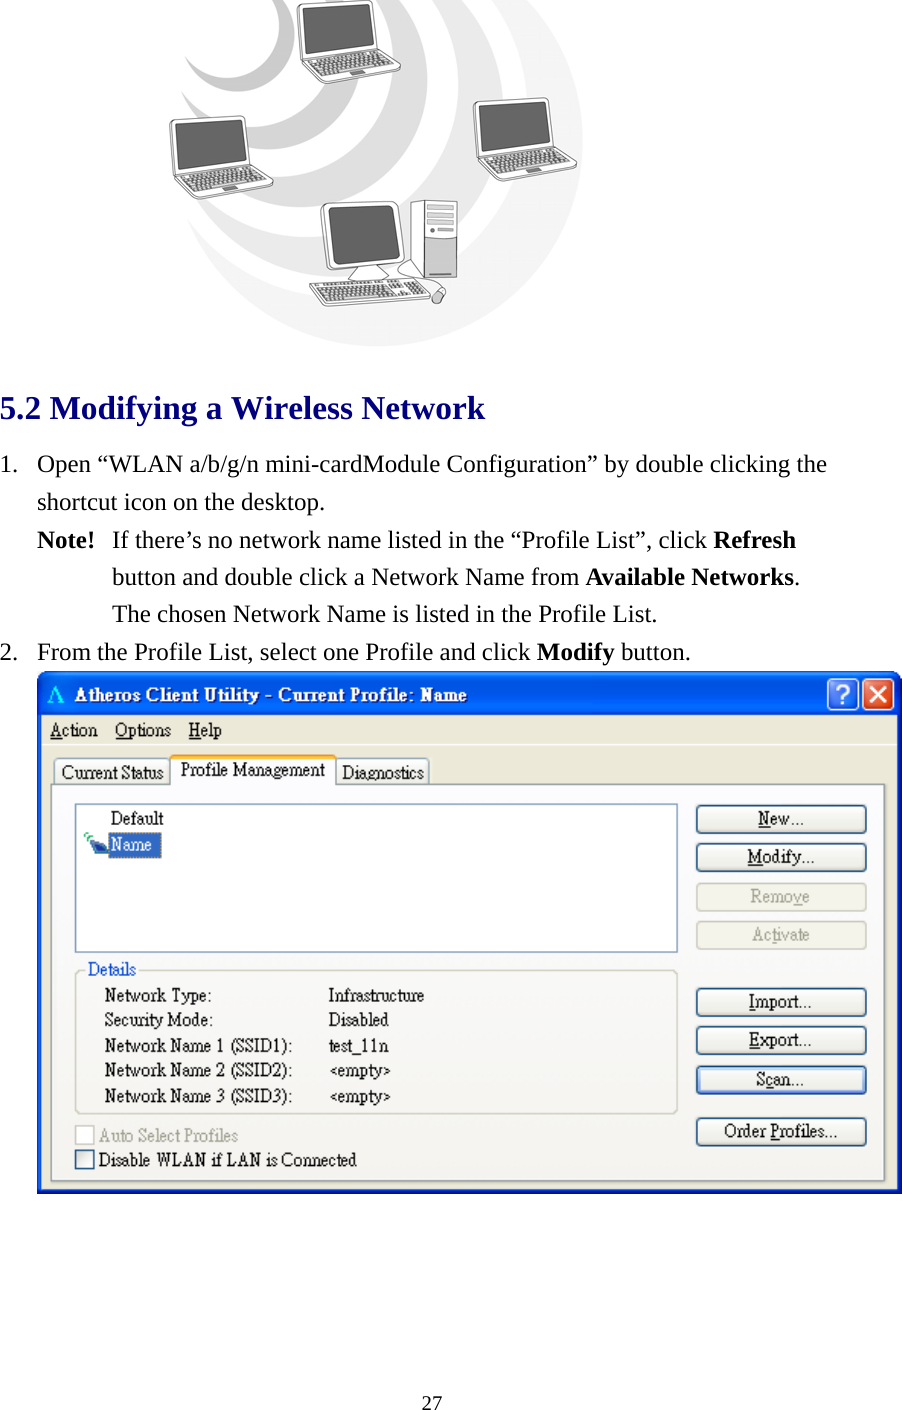  27 5.2 Modifying a Wireless Network   1. Open “WLAN a/b/g/n mini-cardModule Configuration” by double clicking the shortcut icon on the desktop.     Note!   If there’s no network name listed in the “Profile List”, click Refresh  button and double click a Network Name from Available Networks.   The chosen Network Name is listed in the Profile List. 2. From the Profile List, select one Profile and click Modify button.  